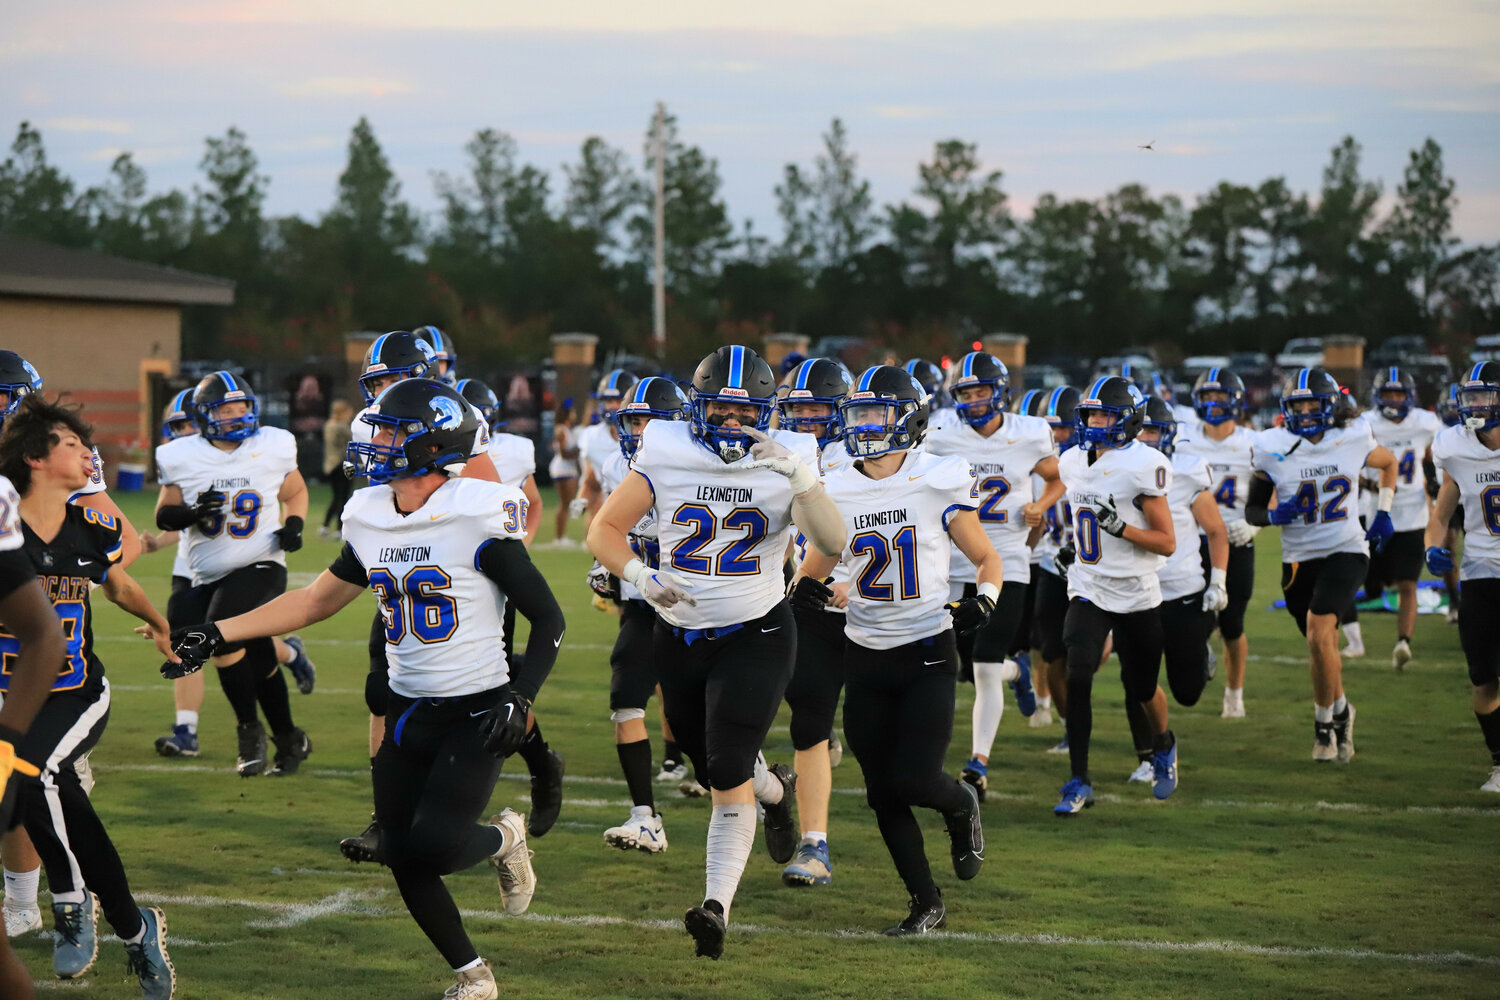 The Lexington Wildcats bounced back from their loss to Gilbert to defeat Chapin 22-14.